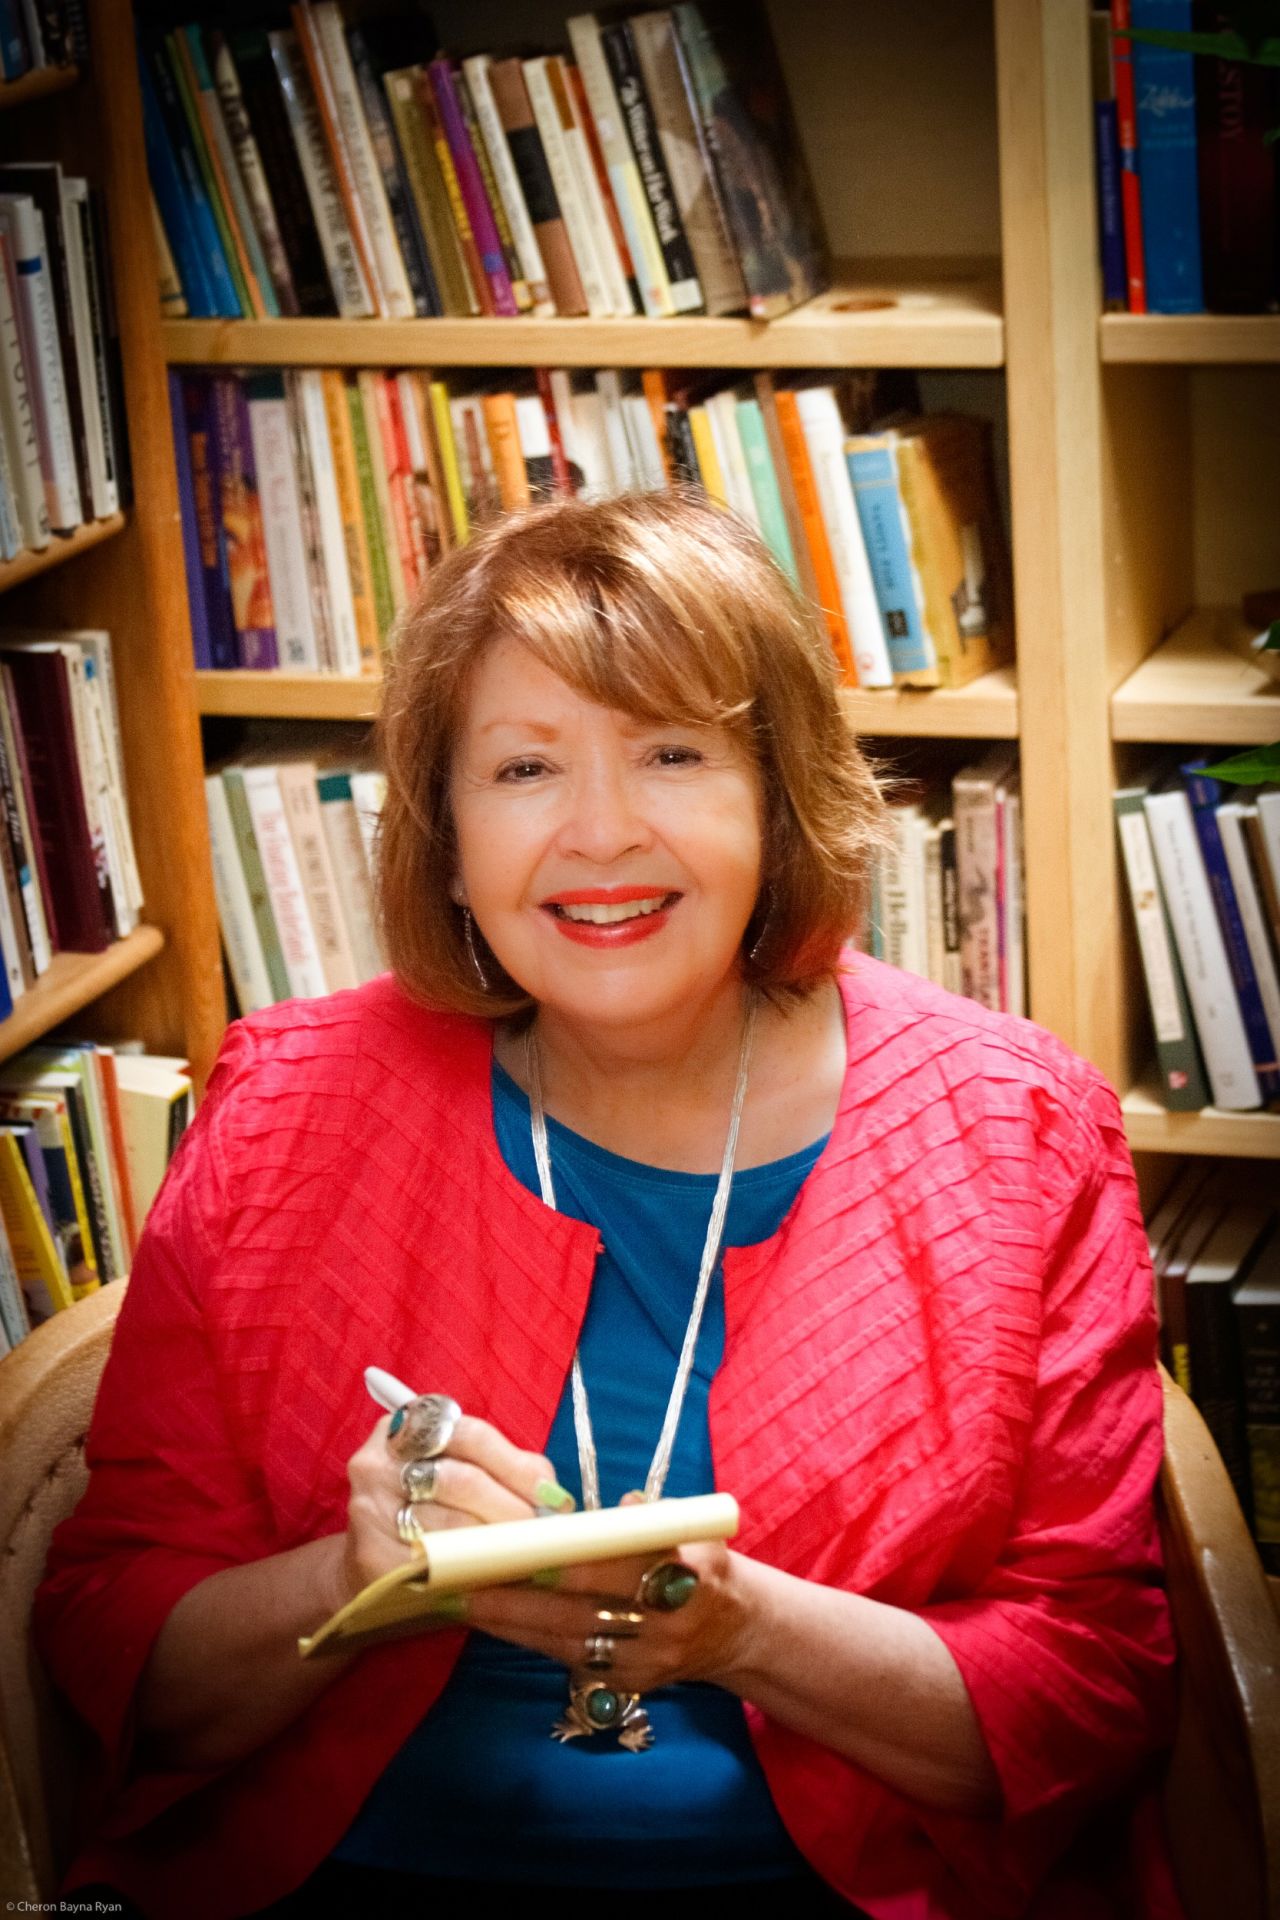 The 2016 Arbuthnot Lecture will be delivered by pioneering author and literacy advocate Pat Mora.